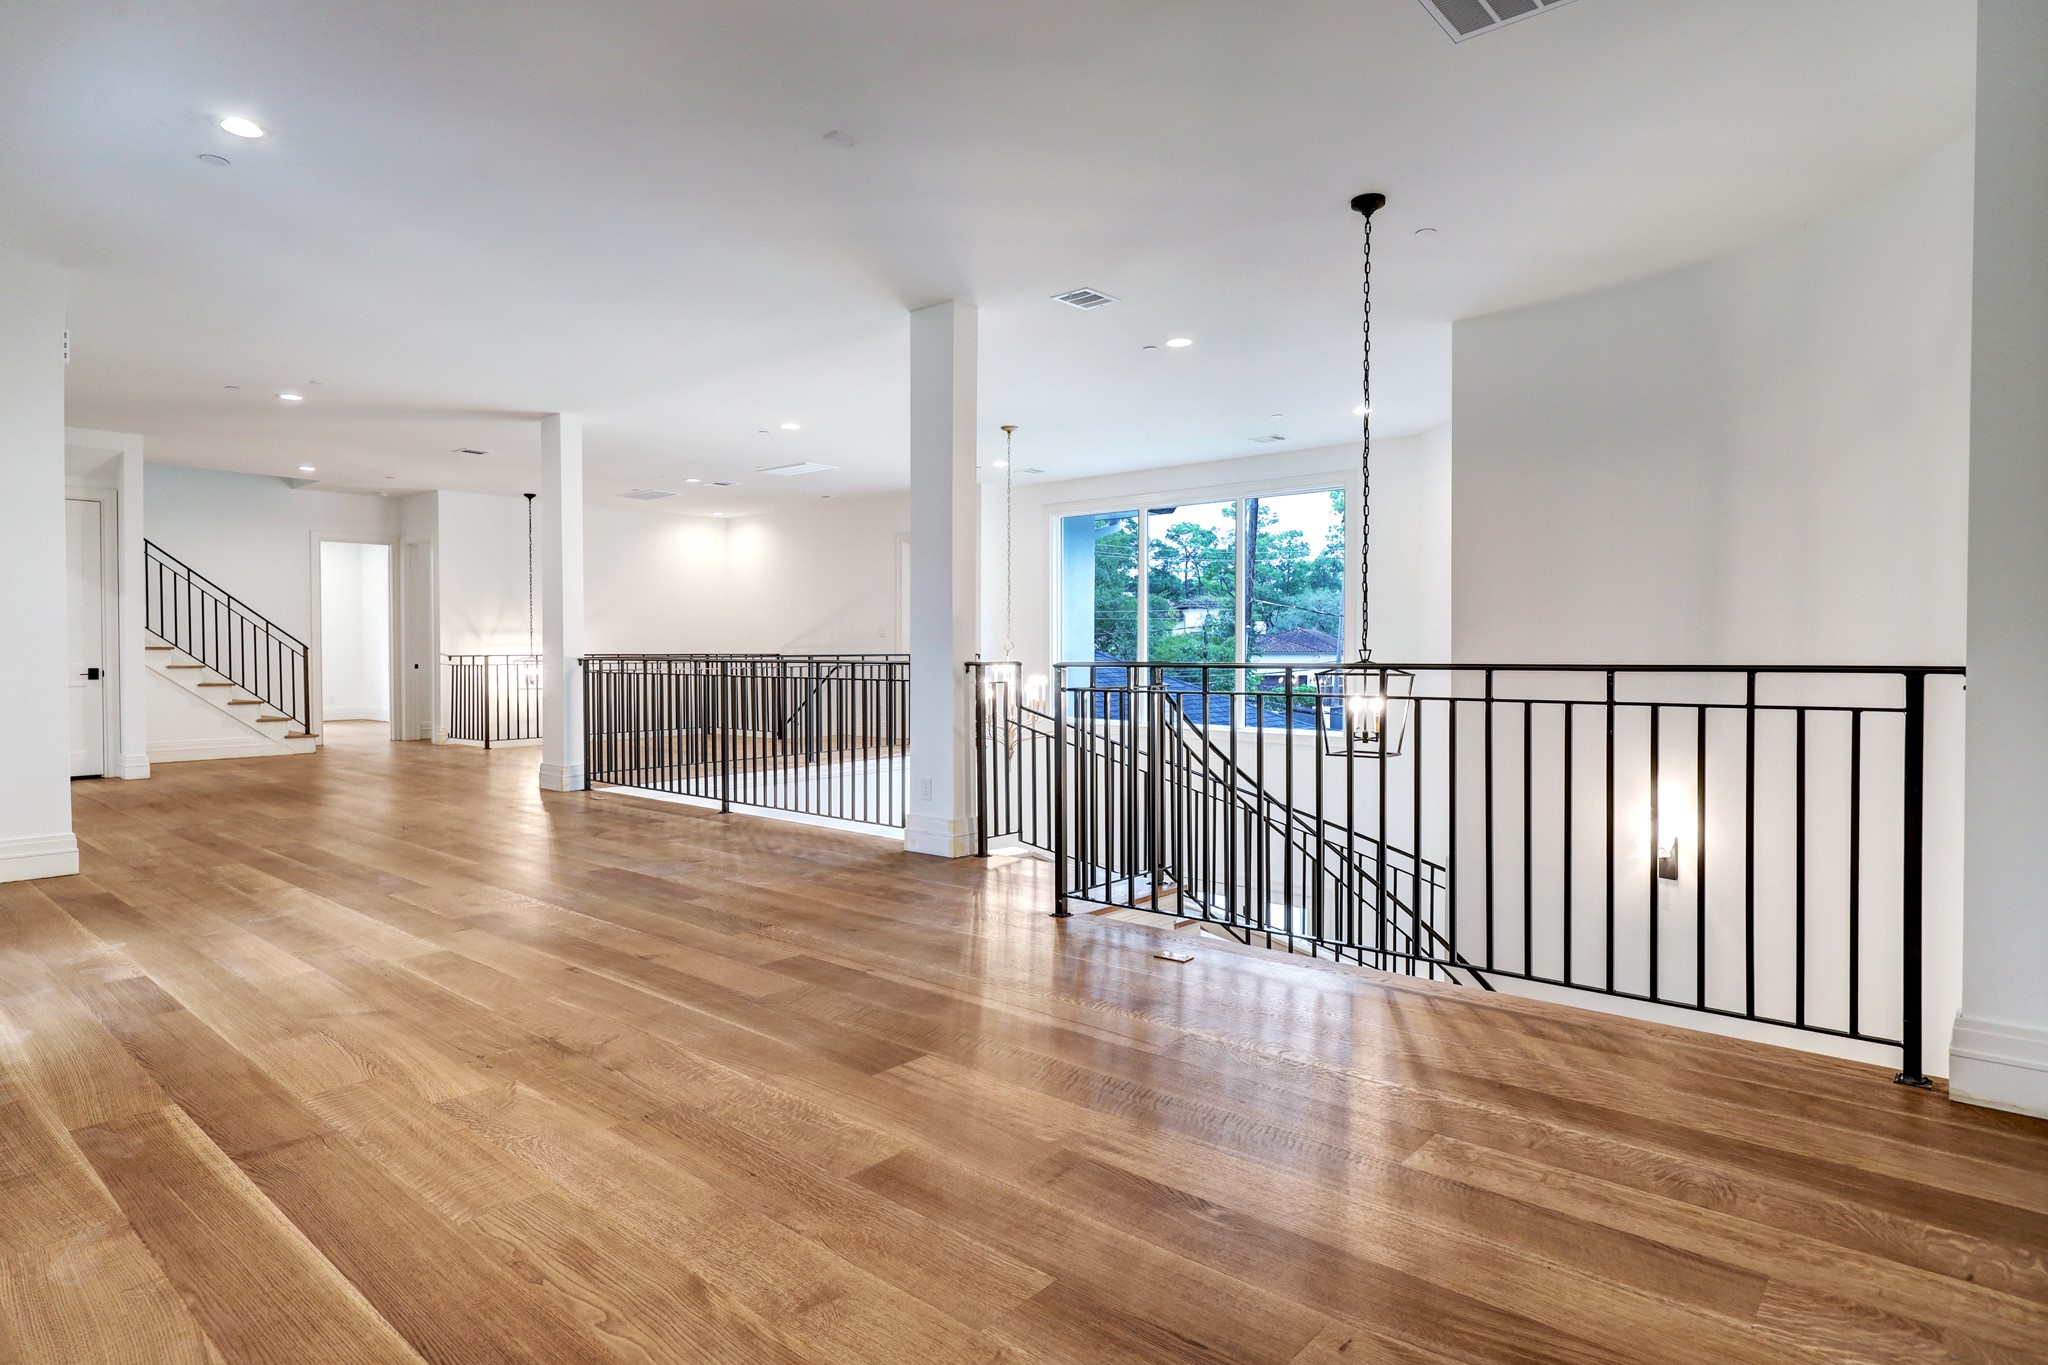 Upstairs landing area - expansive and waiting for your special decor touch. 4 bedrooms, game room, powder bath and media room upstairs.